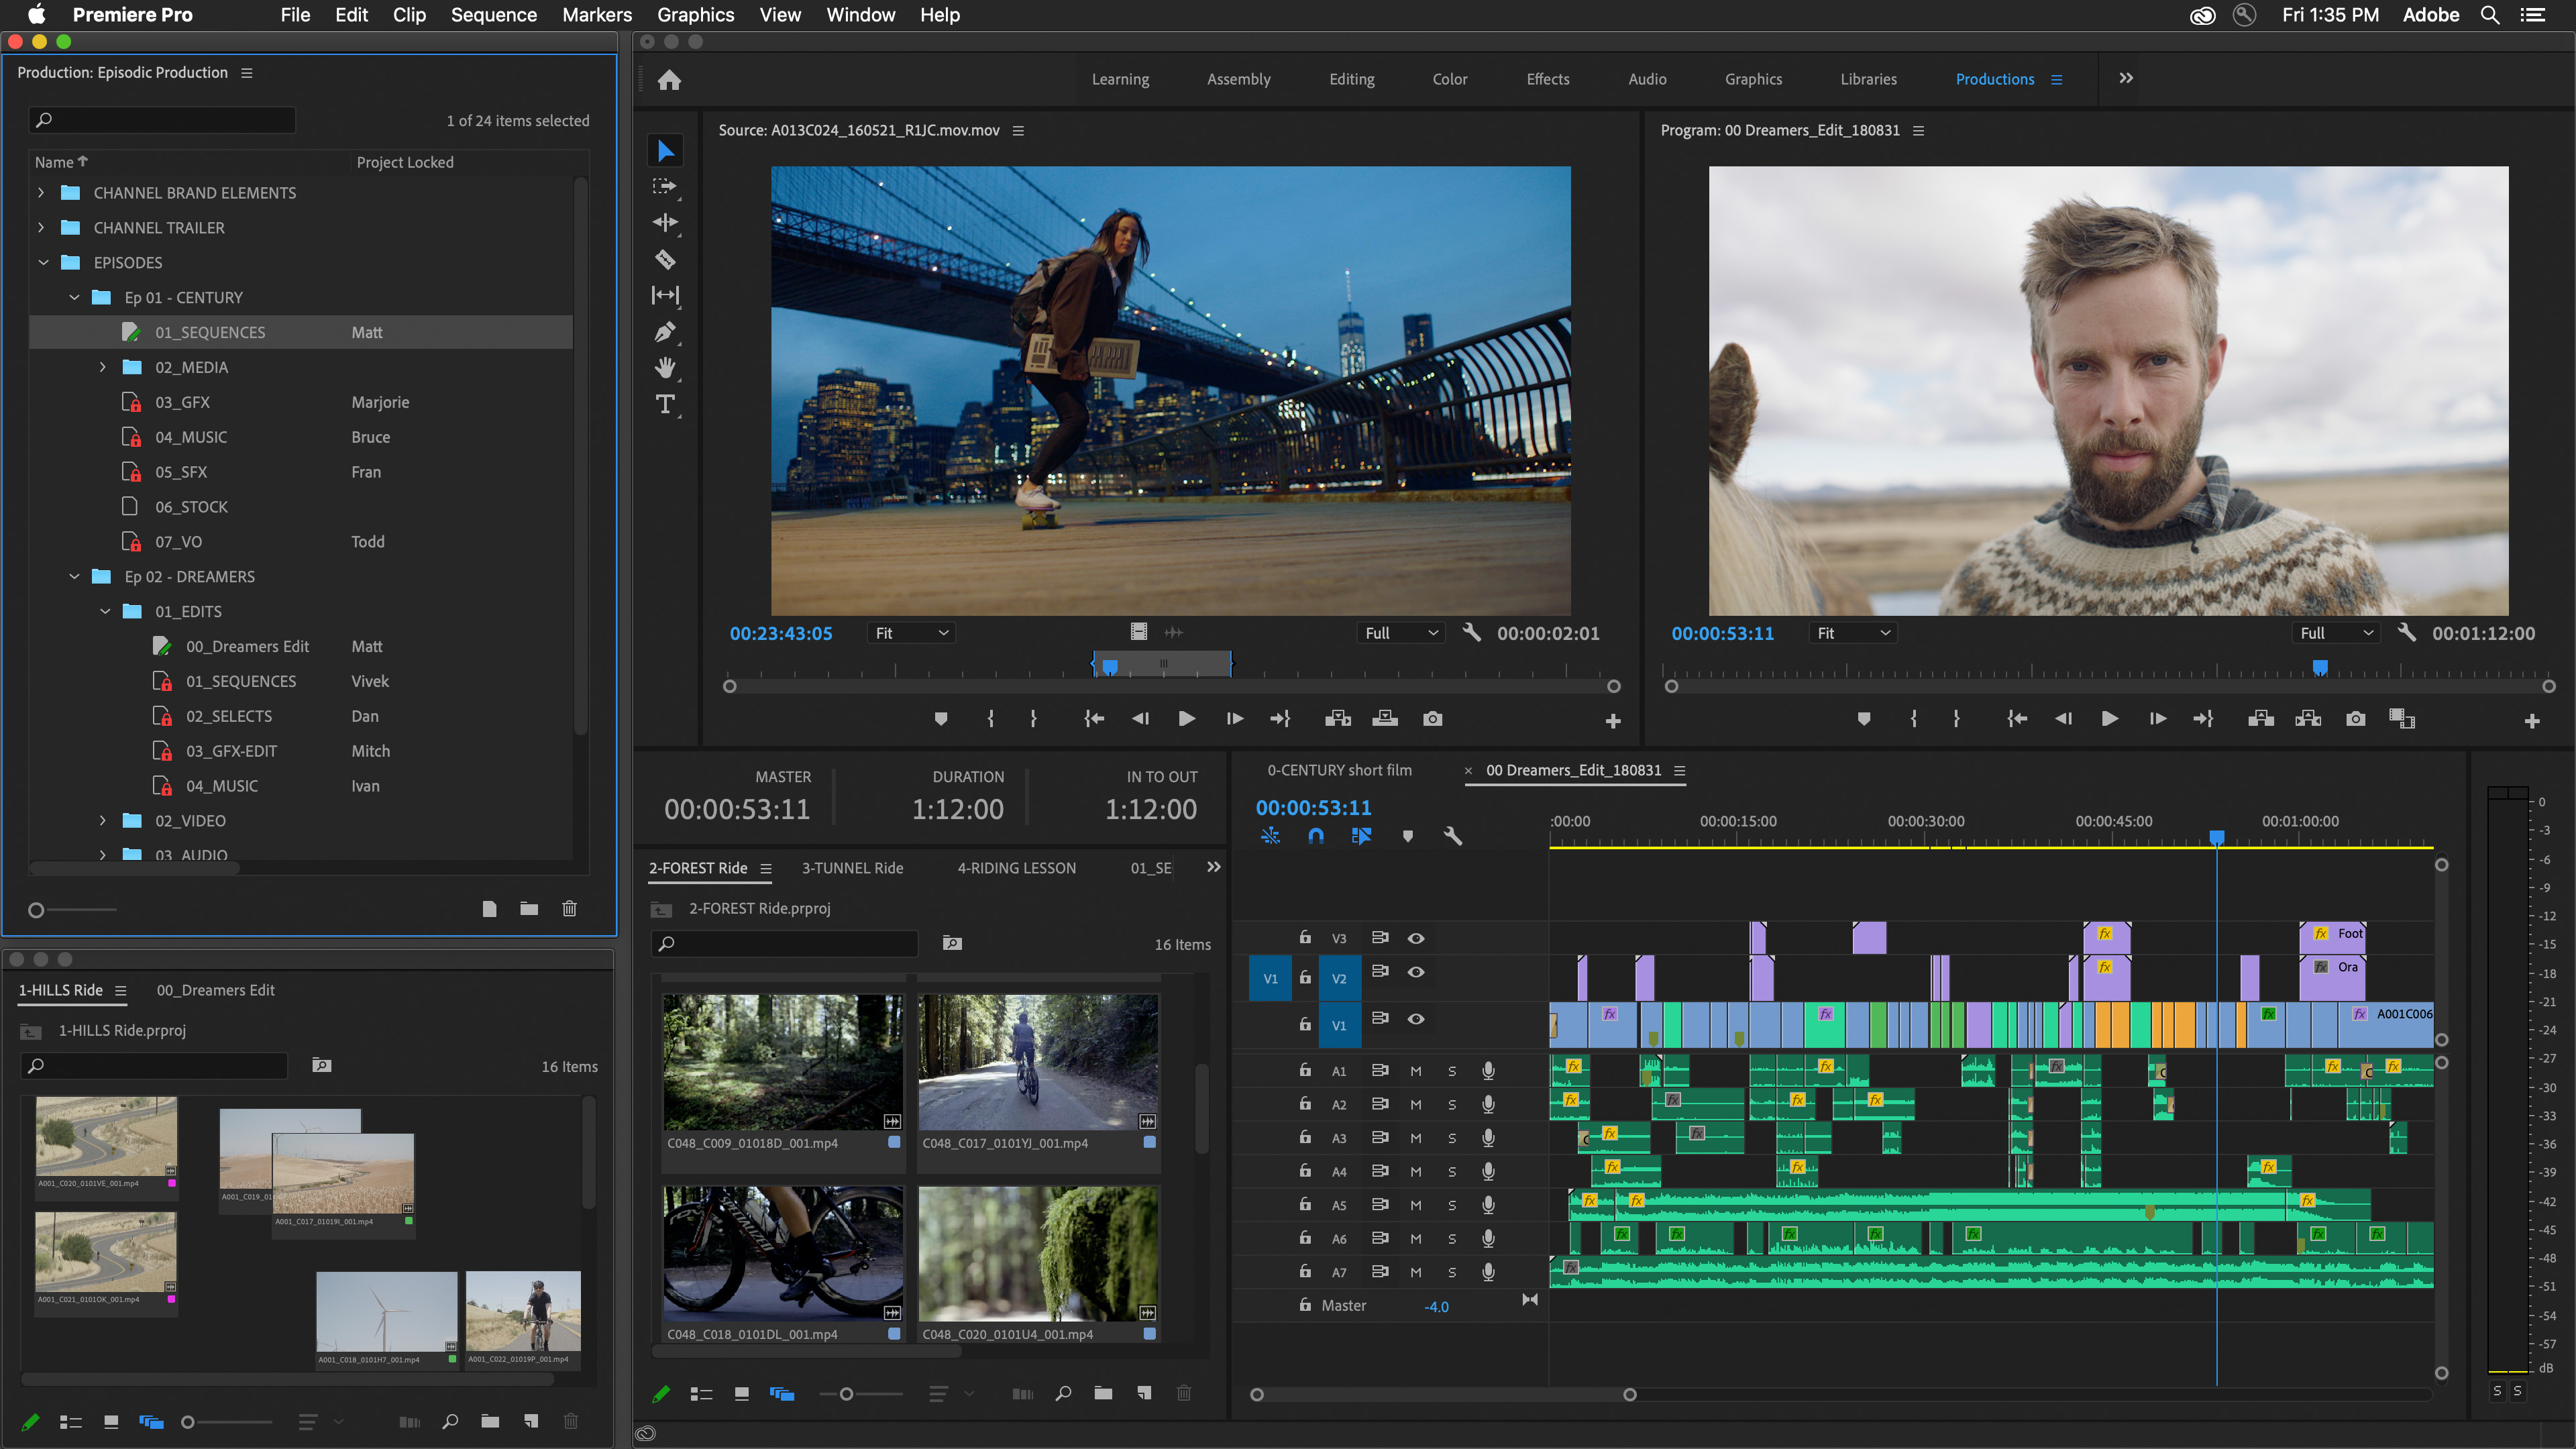 welcome-to-premiere-pro-22-3-1-adobe-community-12874611